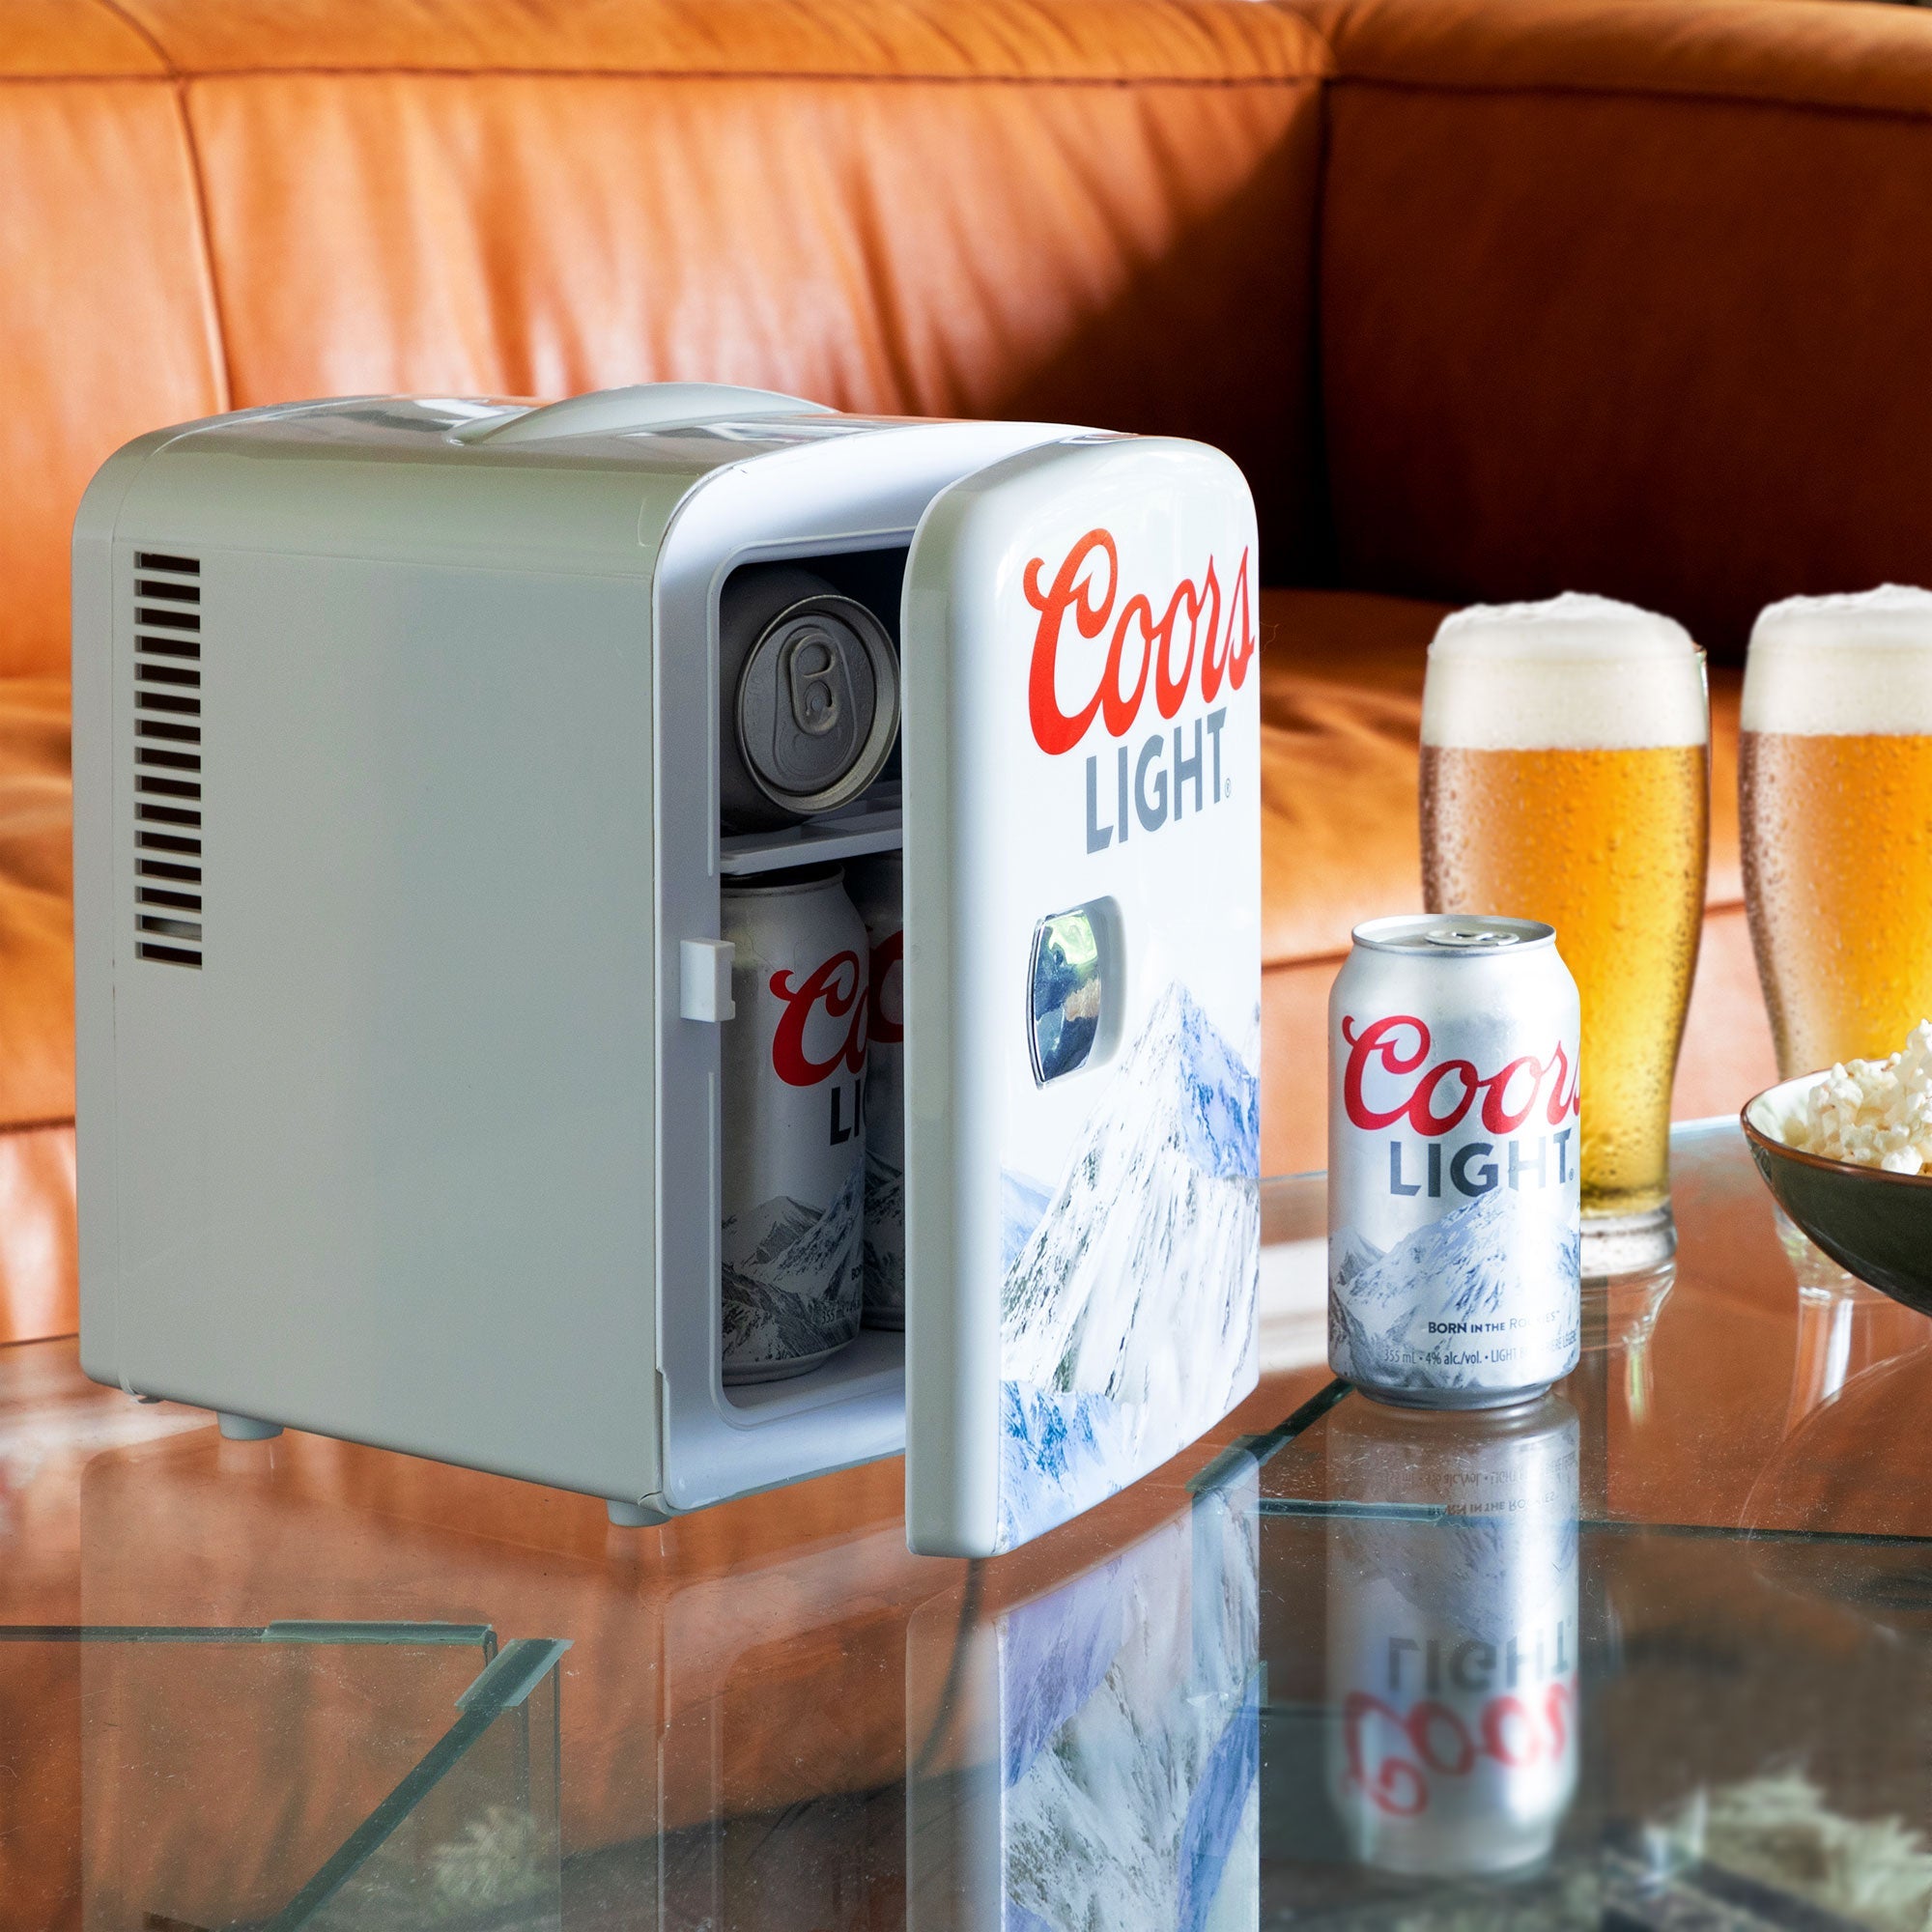 Lifestyle image of Coors Light portable mini fridge, partly open with cans visible inside, on a glass coffee table with a can and two glasses of Coors Light beside it and a tan leather sofa behind